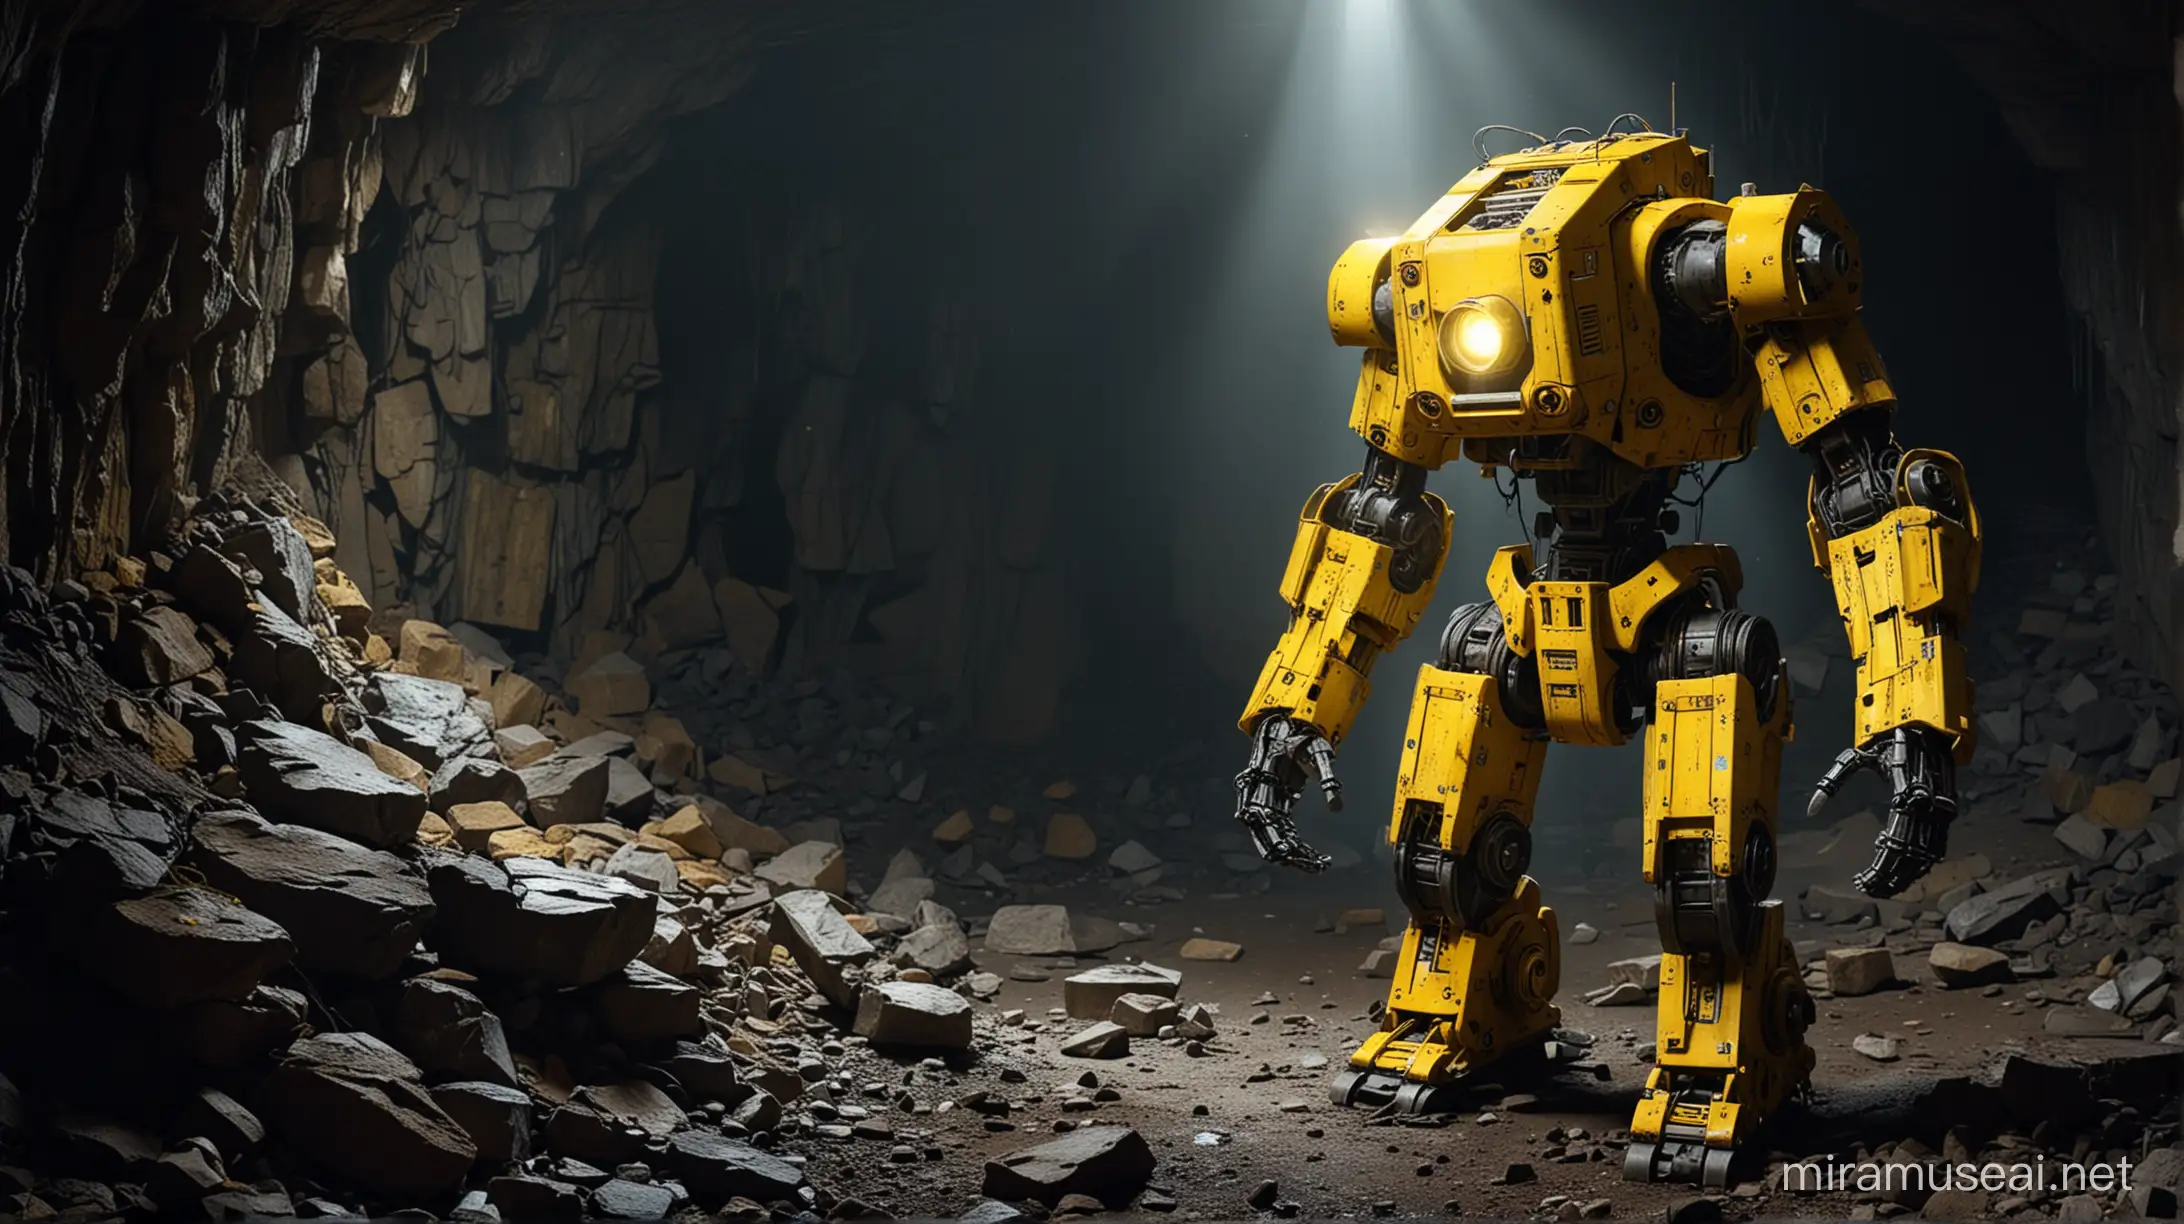 a robot exploring an abandoned mine, the robot is bright yellow, the robot shines a light through the darkness